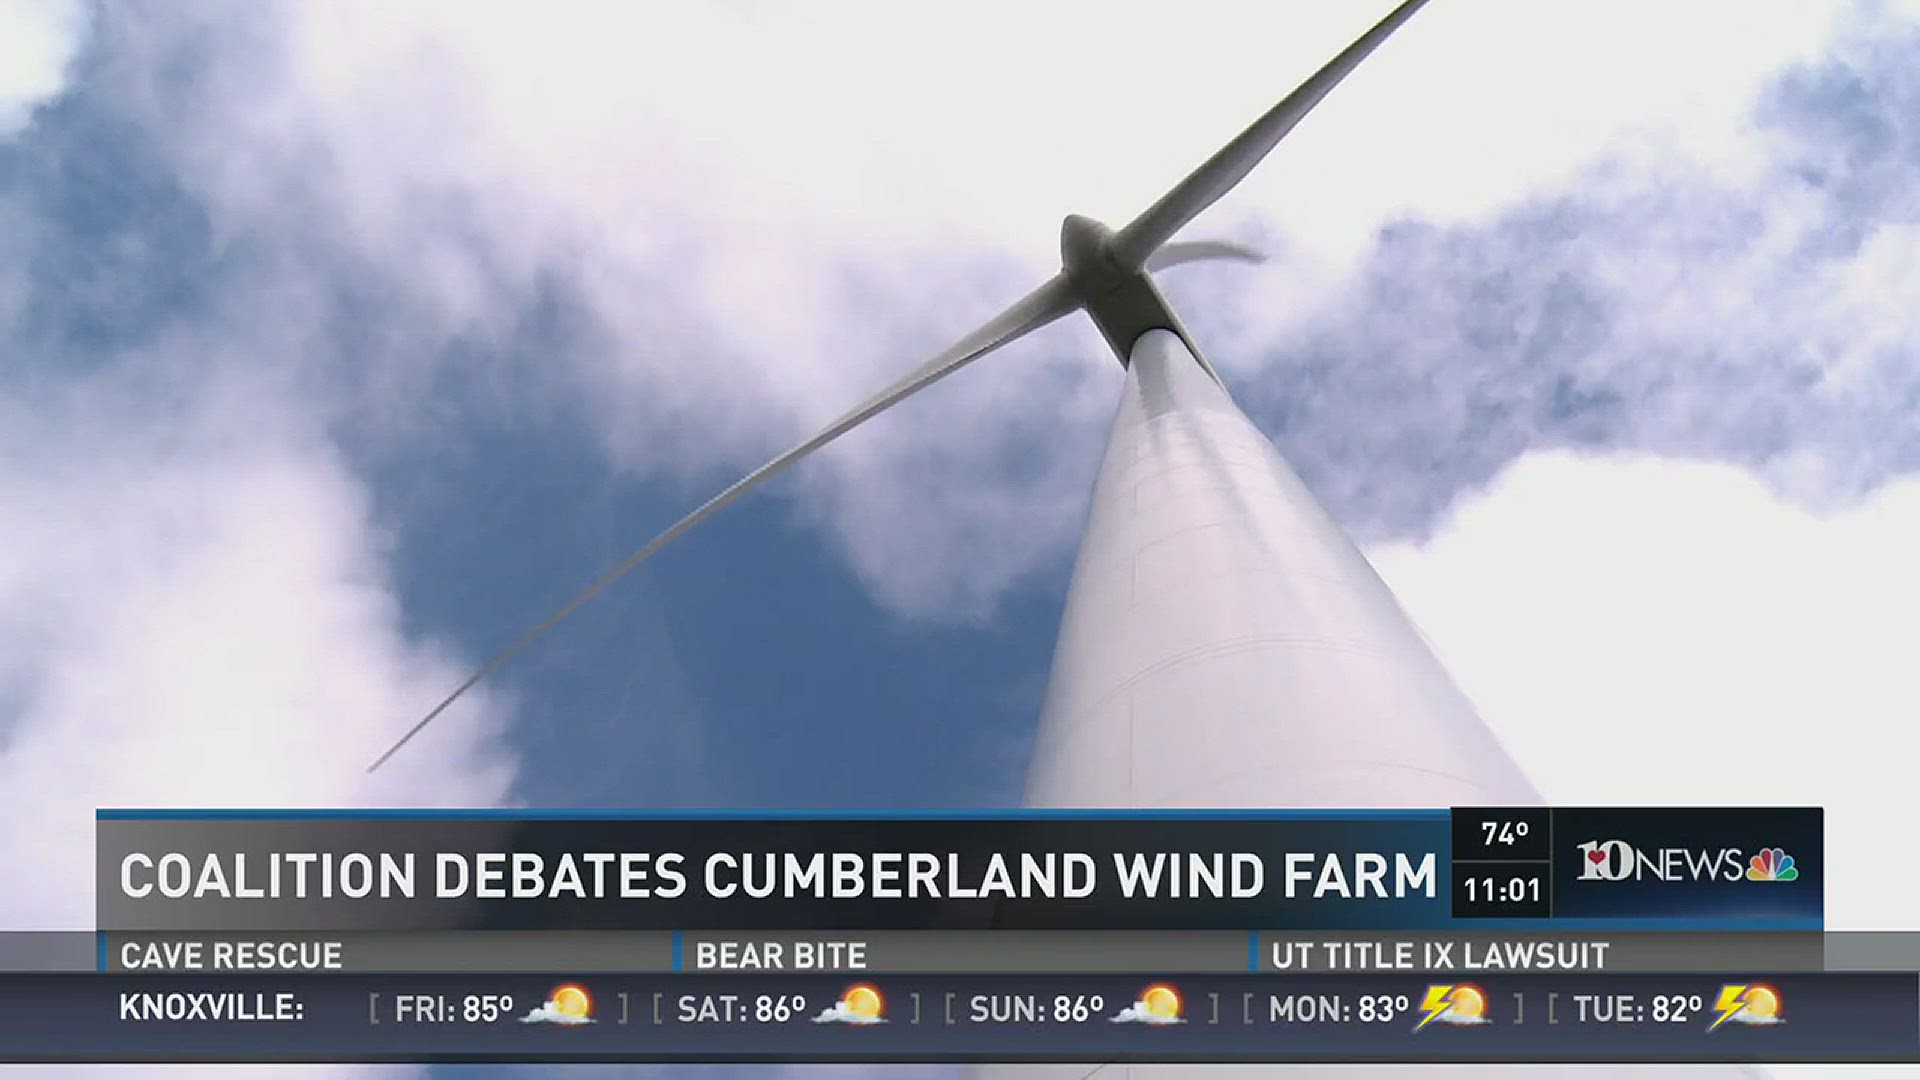 10News reporter Leslie Ackerson has more on concerns surrounding a proposed wind farm in Cumberland County, Tenn. (5/26/16)